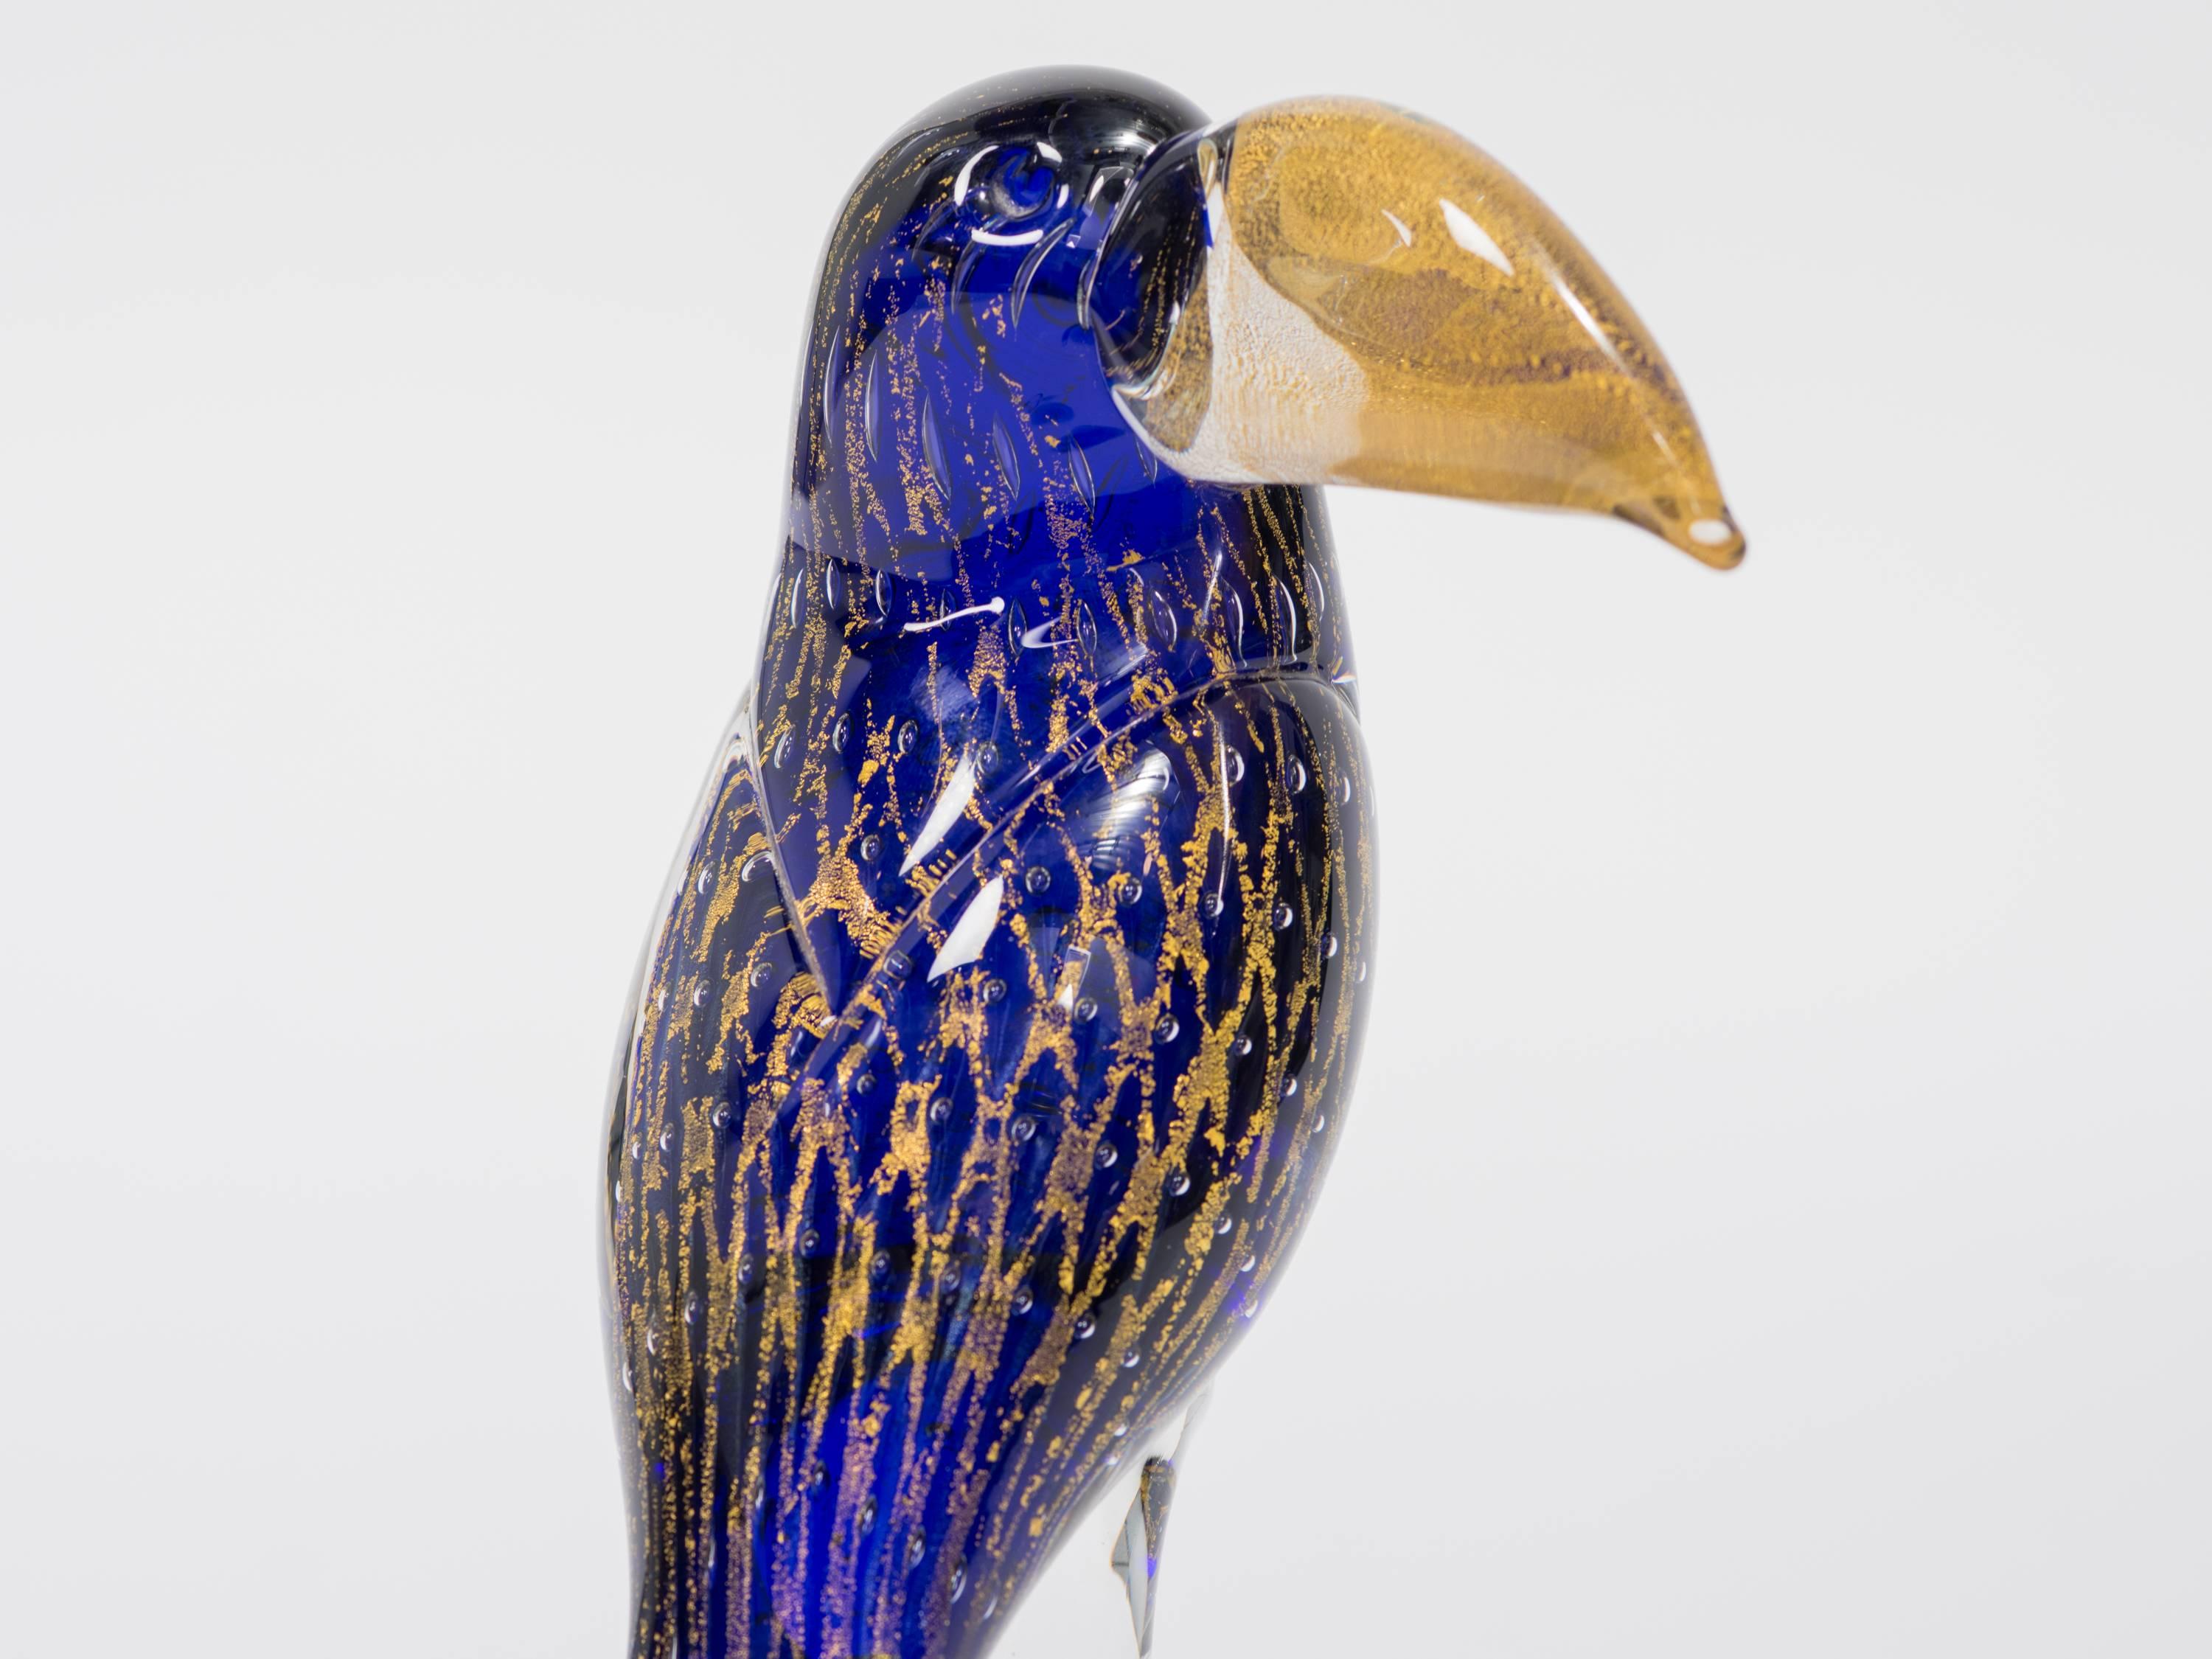 Blue and gold flake Murano glass toucan.